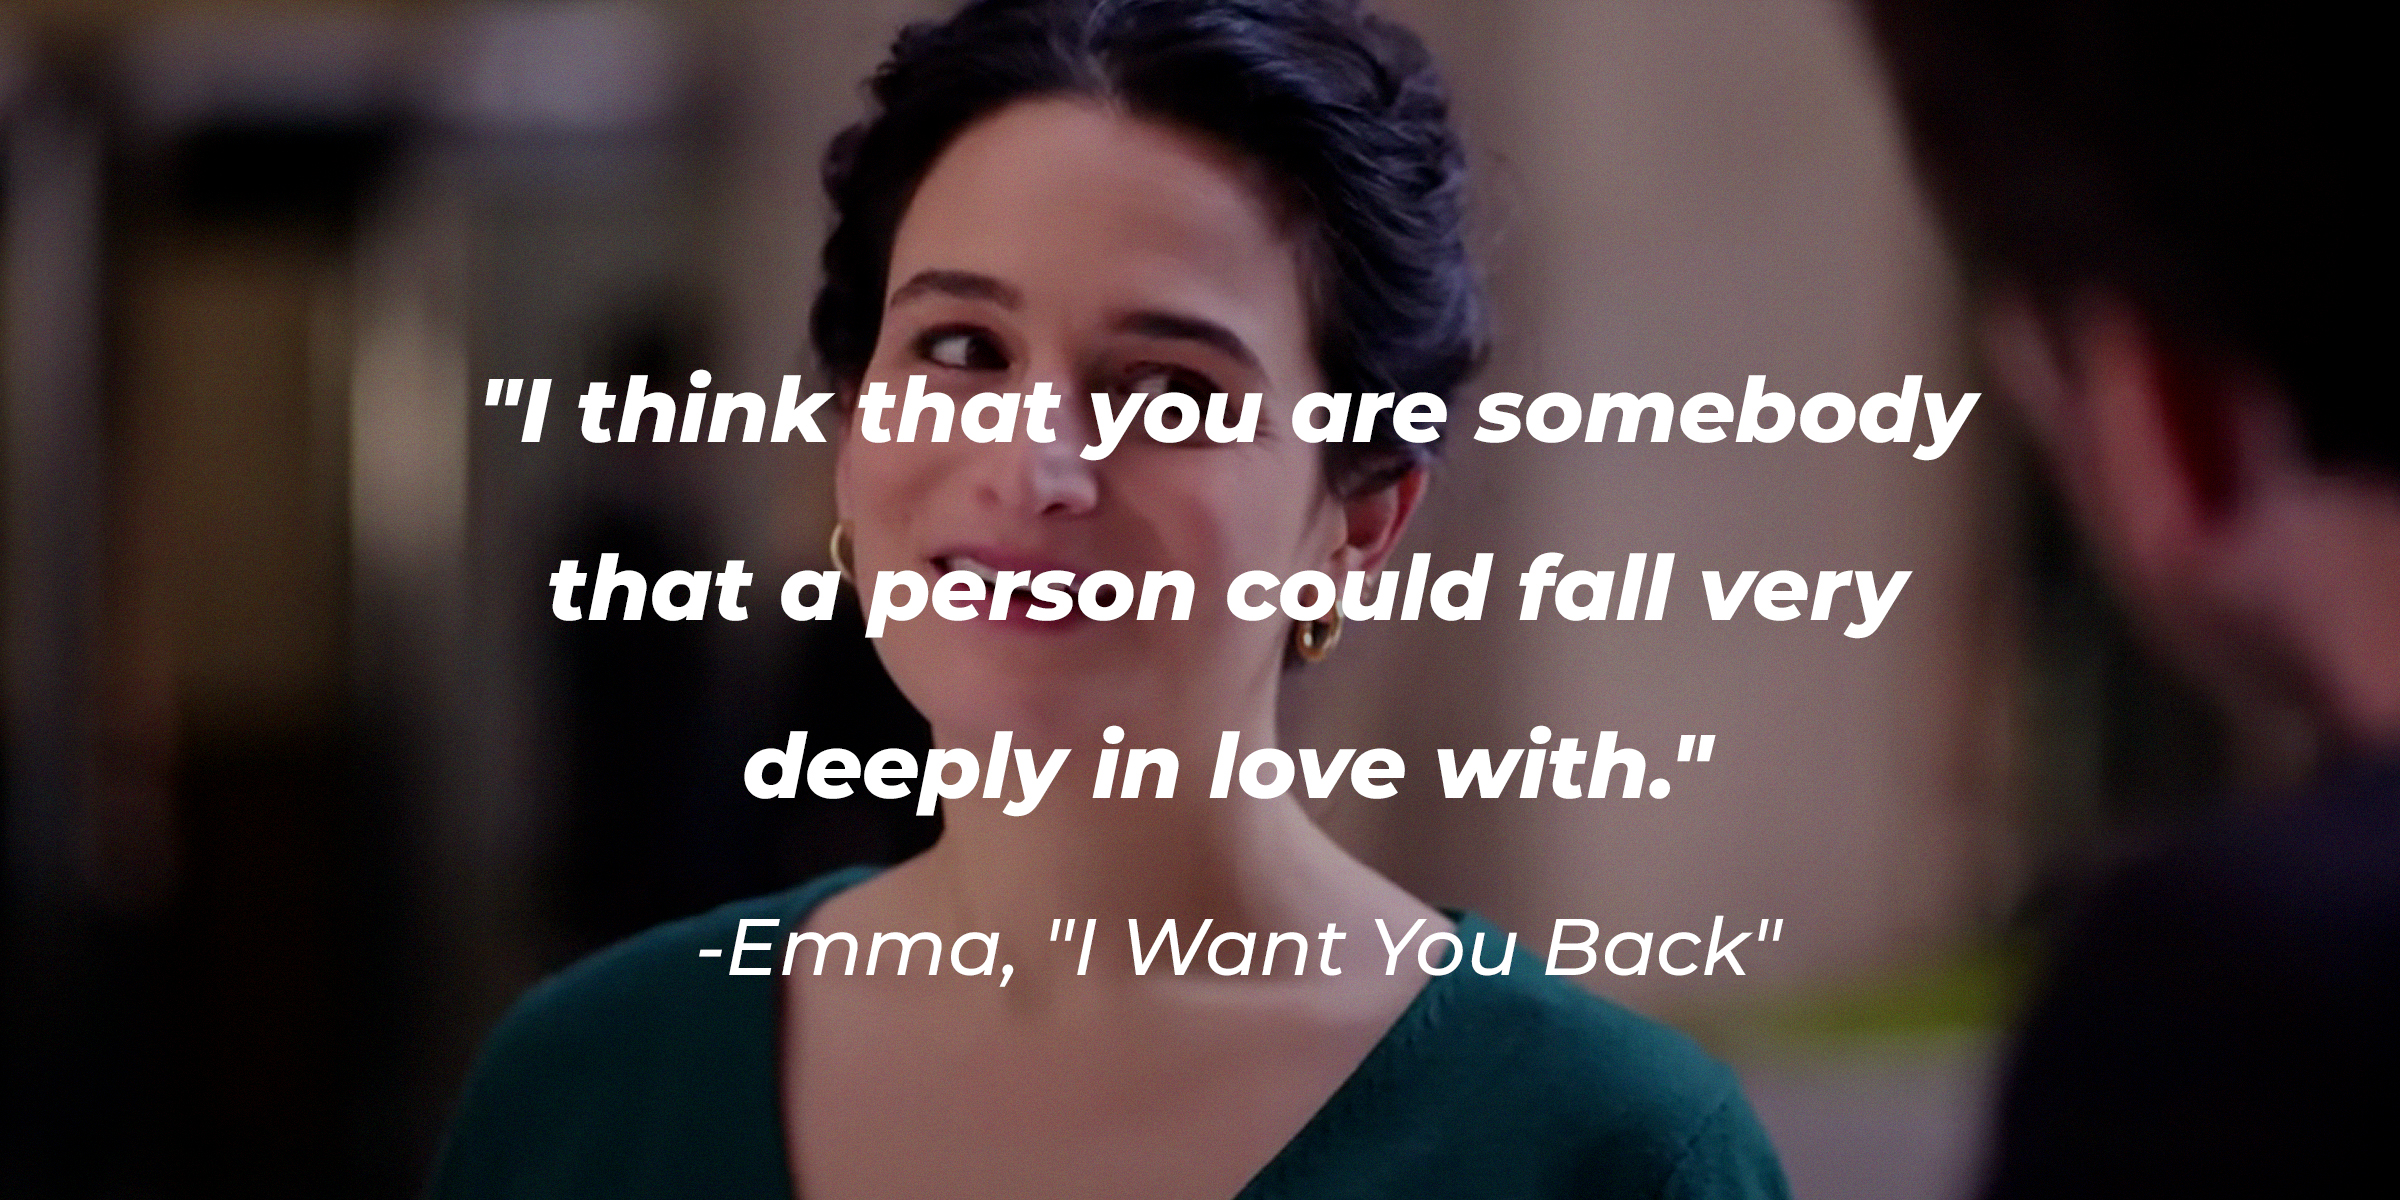 Emma with her quote: "I think that you are somebody that a person could fall very deeply in love with." | Source: Youtube.com/PrimeVideo